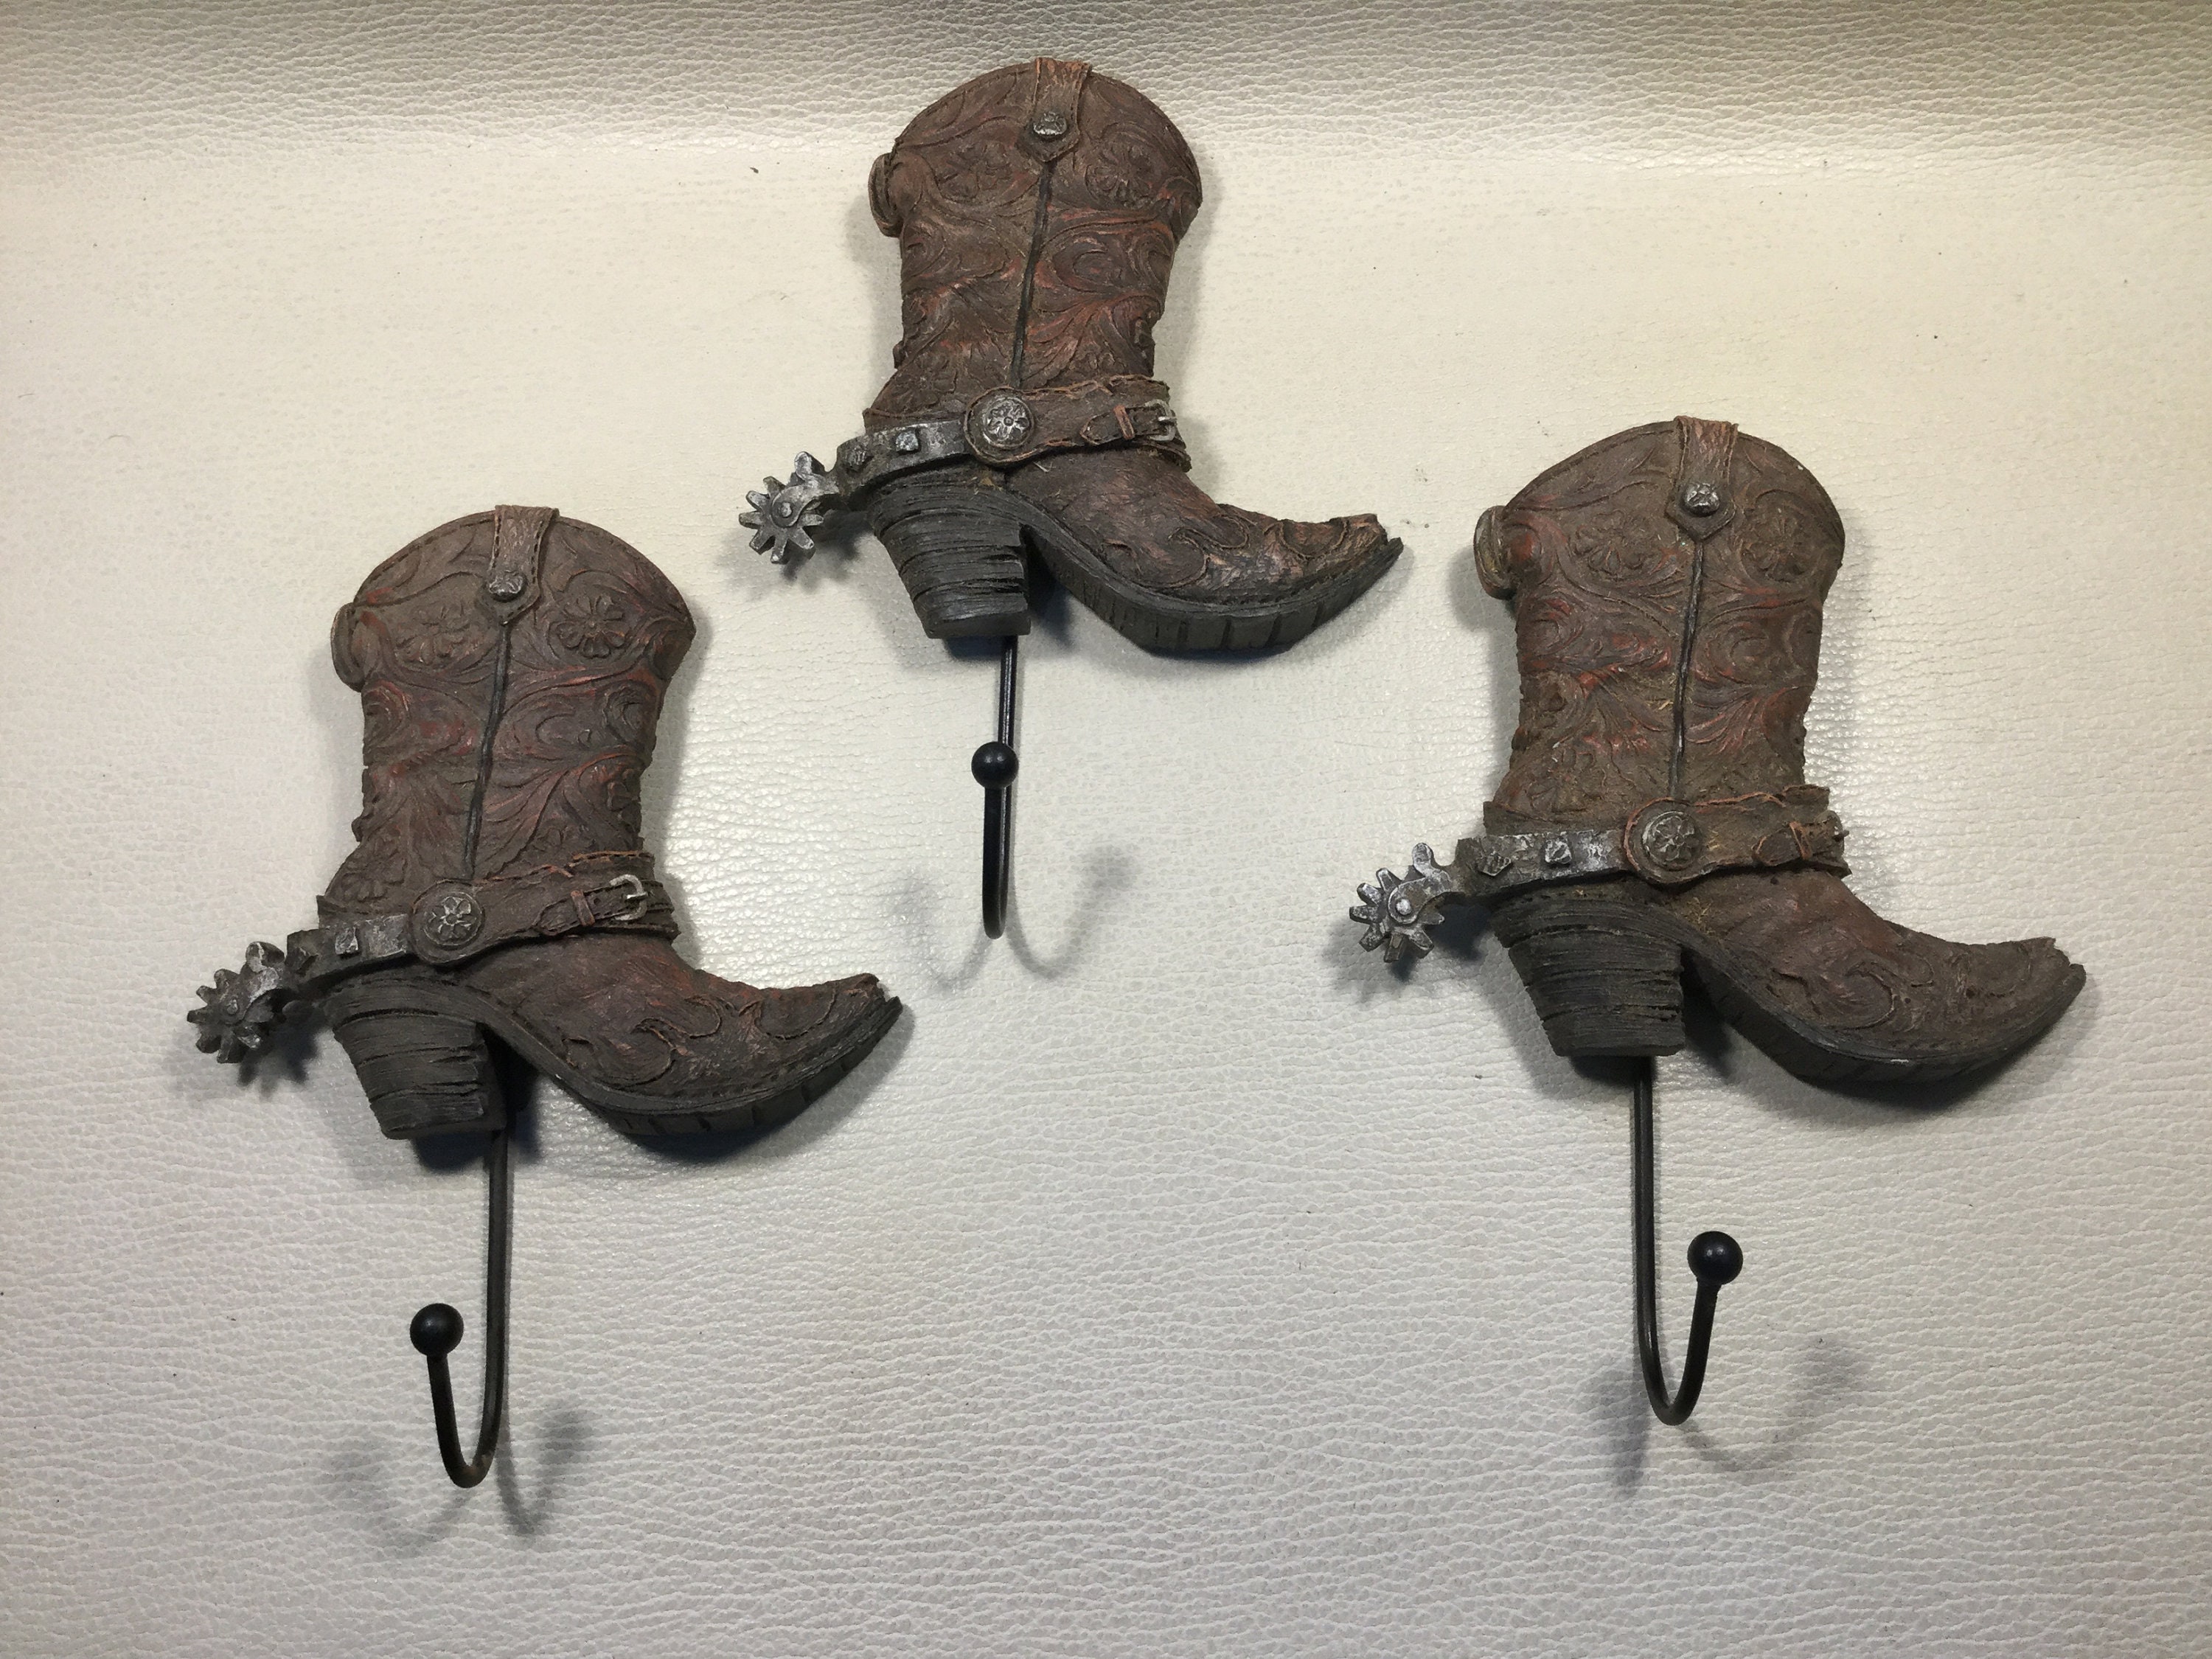 [4 Pack] Boot Hooks Boot Pullers for Putting on Cowboy Boots - Hook Boots  Easily with Shoe Pullers - Save Time with Boot Hooks for Men & Women - Help